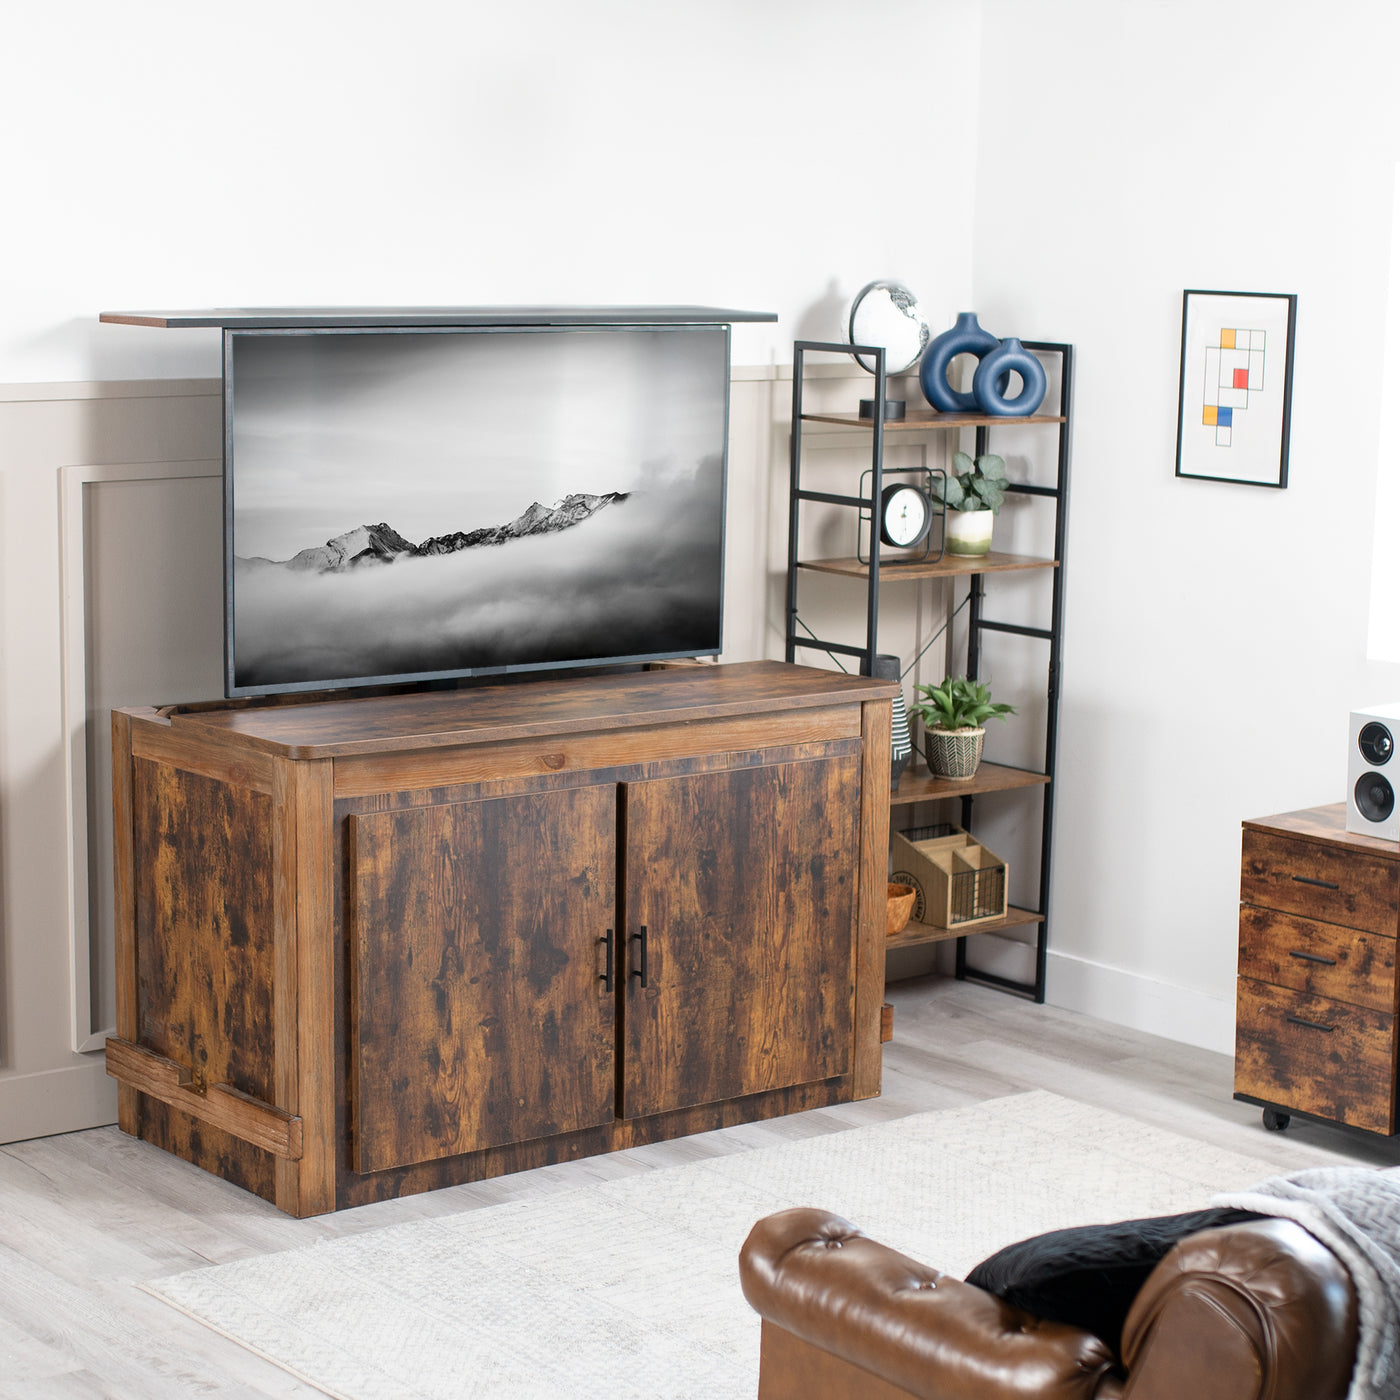 Motorized TV Stand with Remote Control coming out of a cabinet in living room.